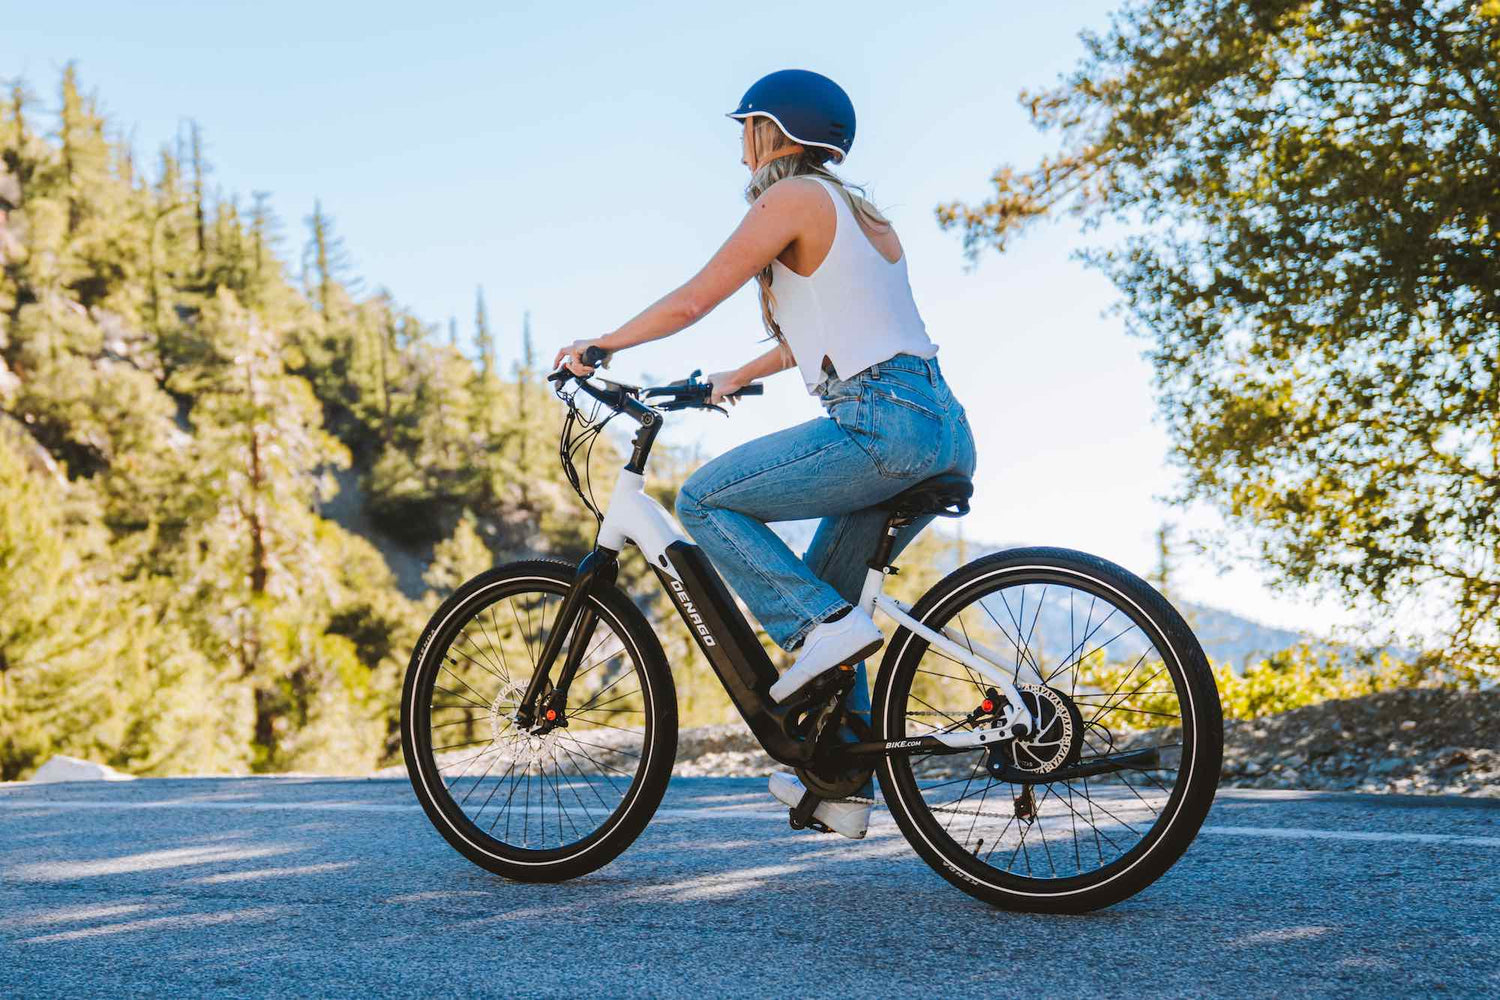 Woman in a white shirt with an eBike on Mt. Baldy road